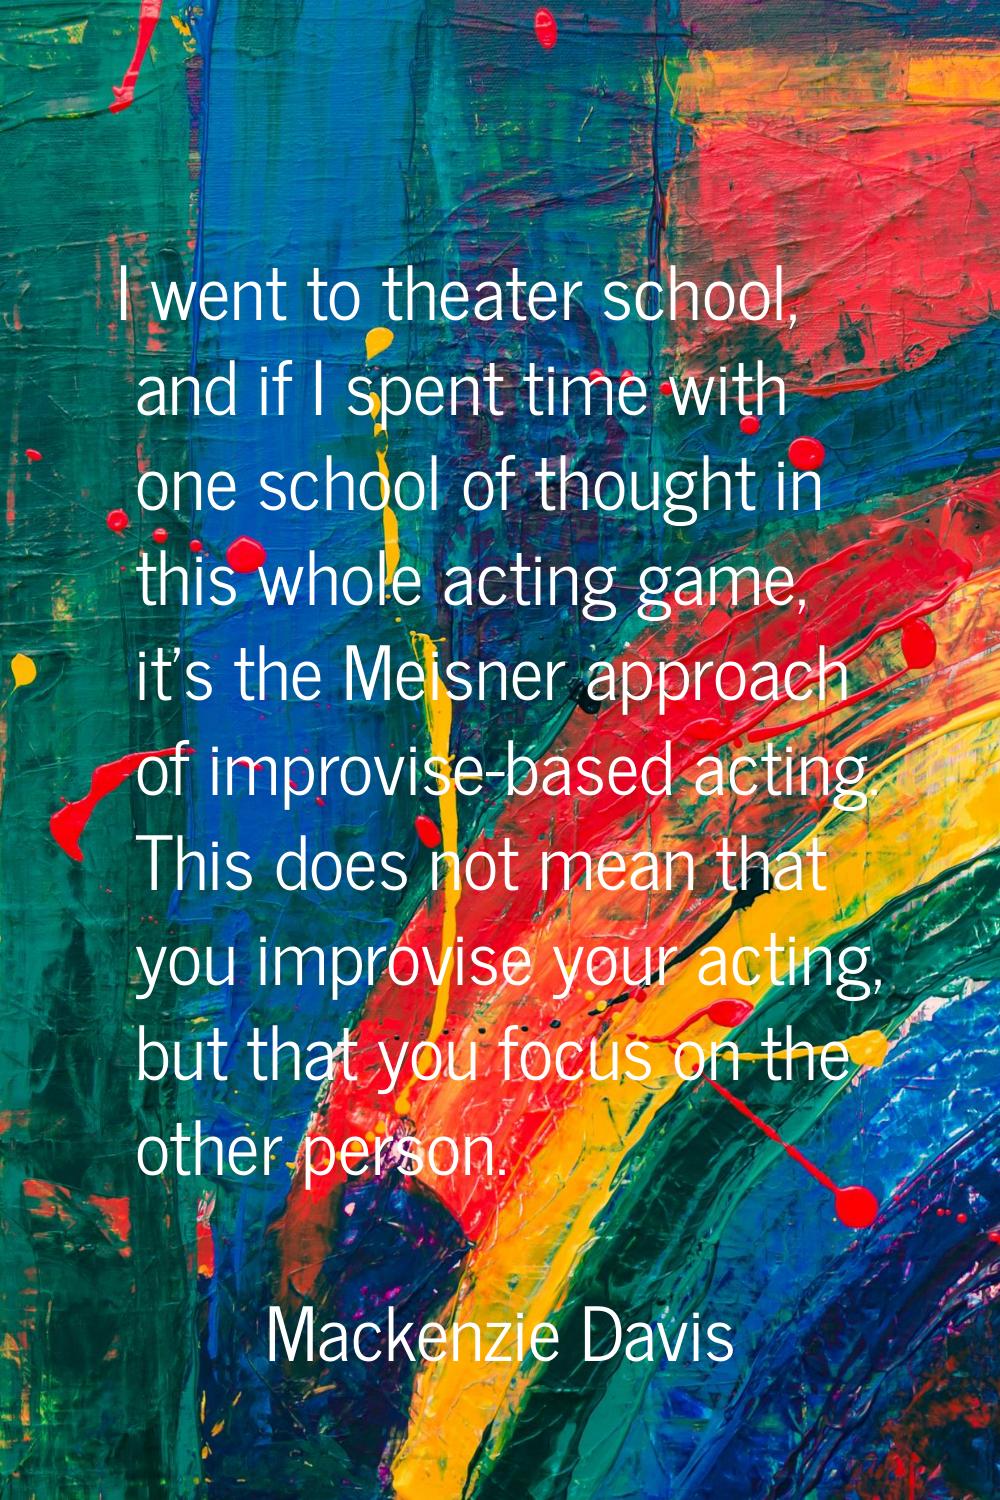 I went to theater school, and if I spent time with one school of thought in this whole acting game,